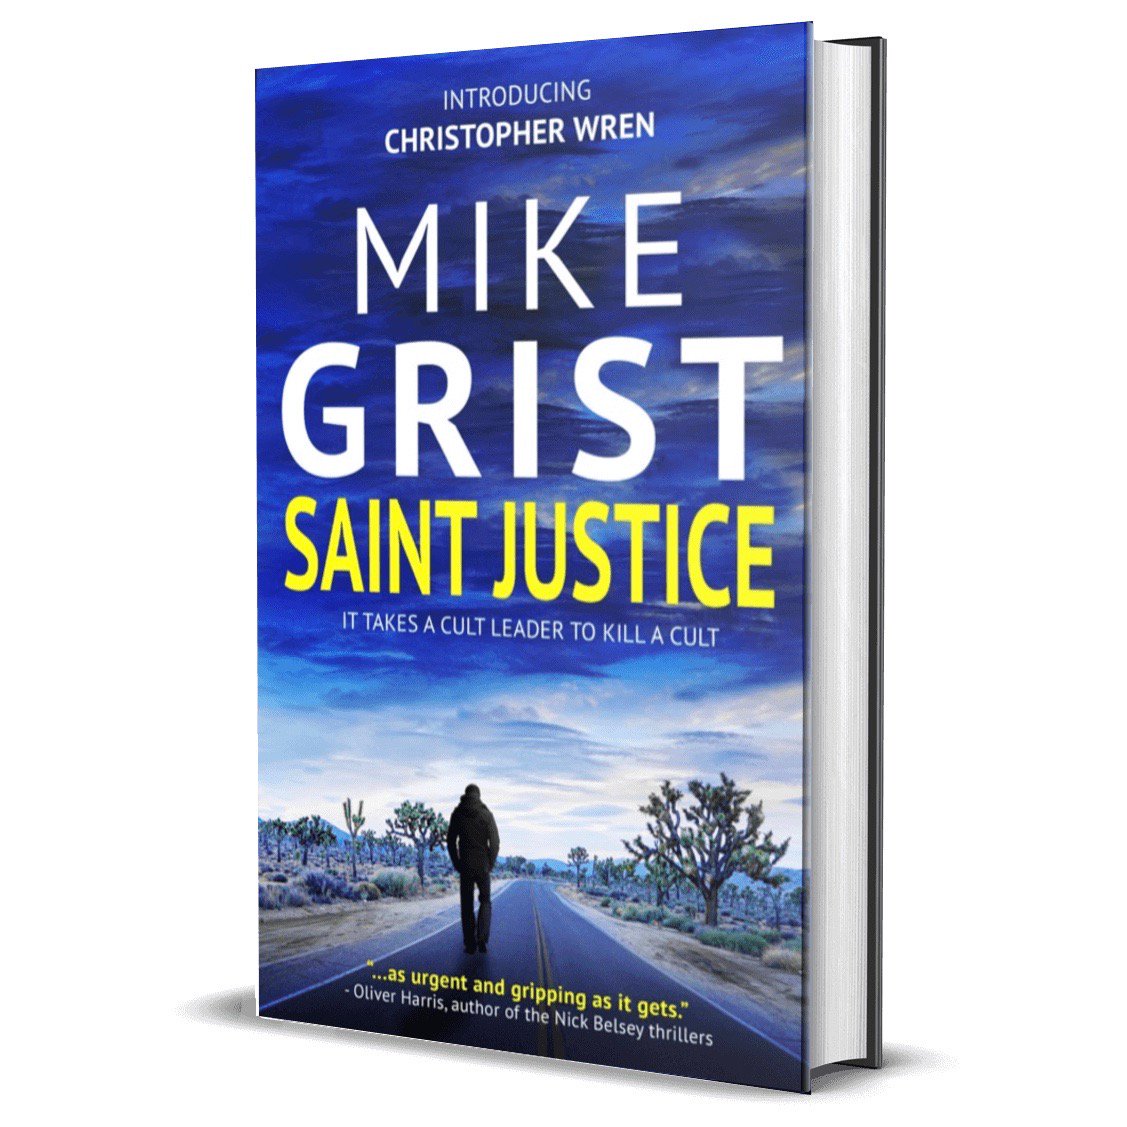 My brand new vigilante justice #thriller is a #freebook for 5 days - get it by July 3 now #Amazon #BookGiveaway #FreeReads - amazon.com/gp/product/B07…